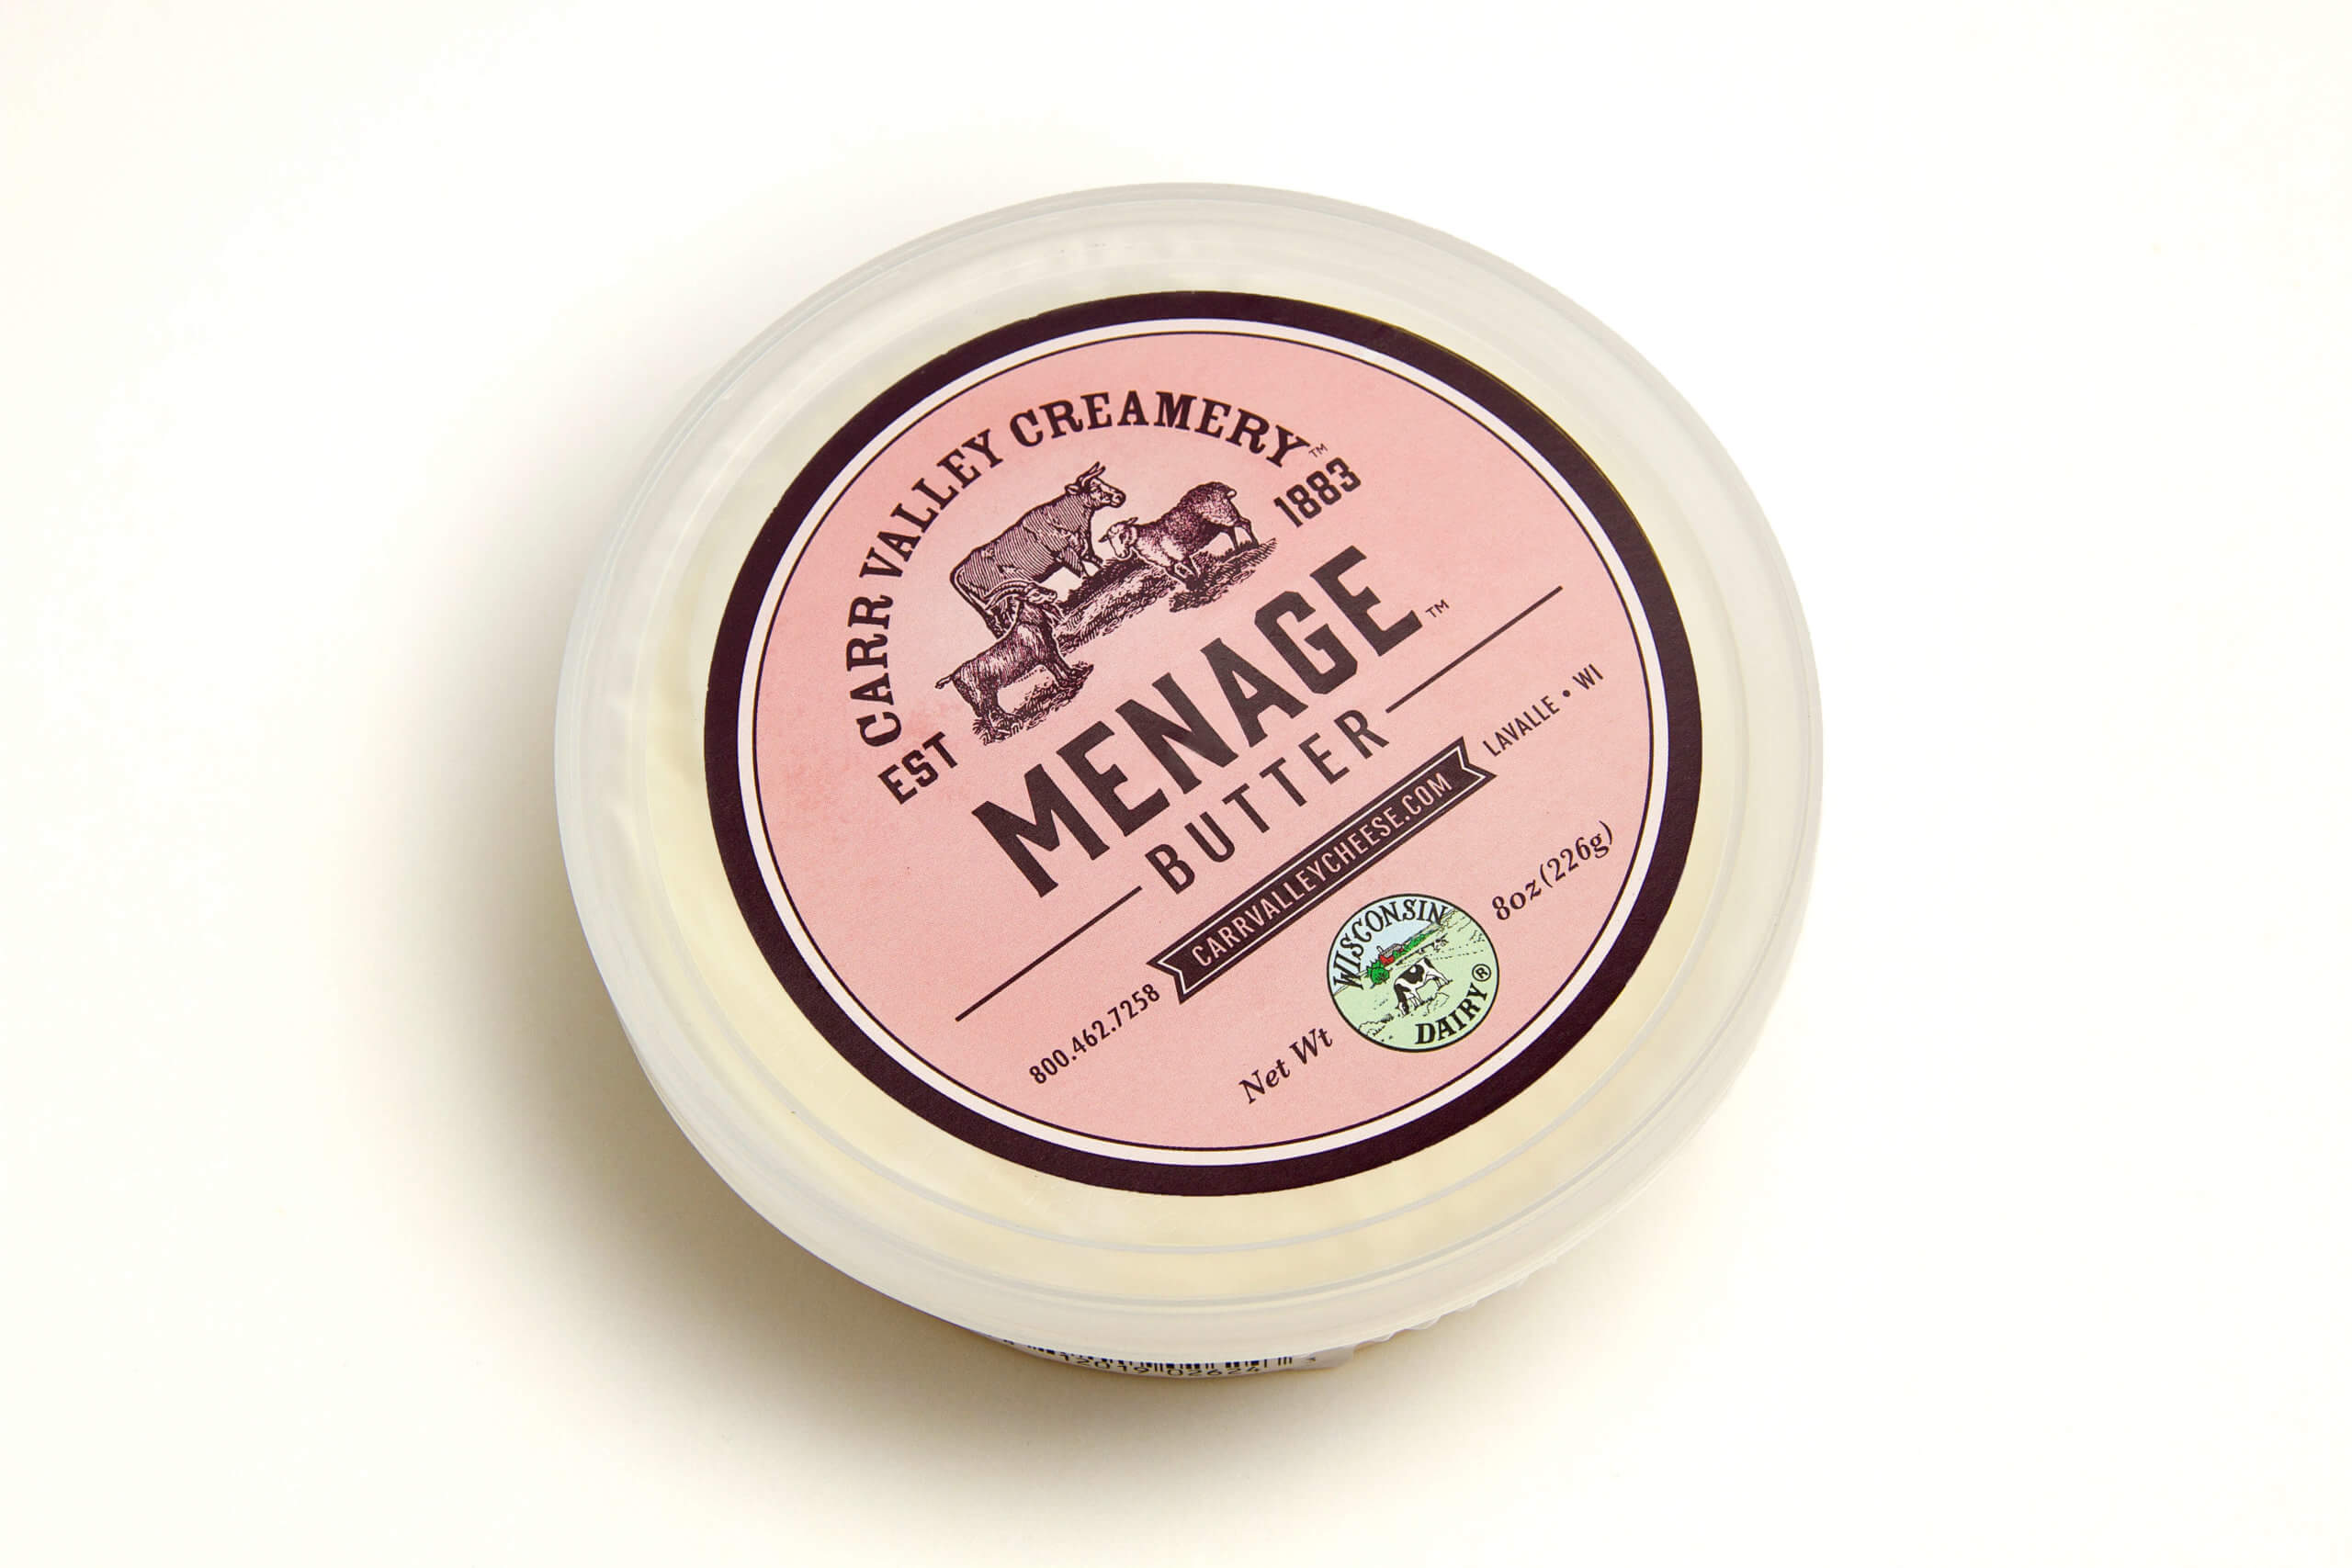 Menage Butter (cup)